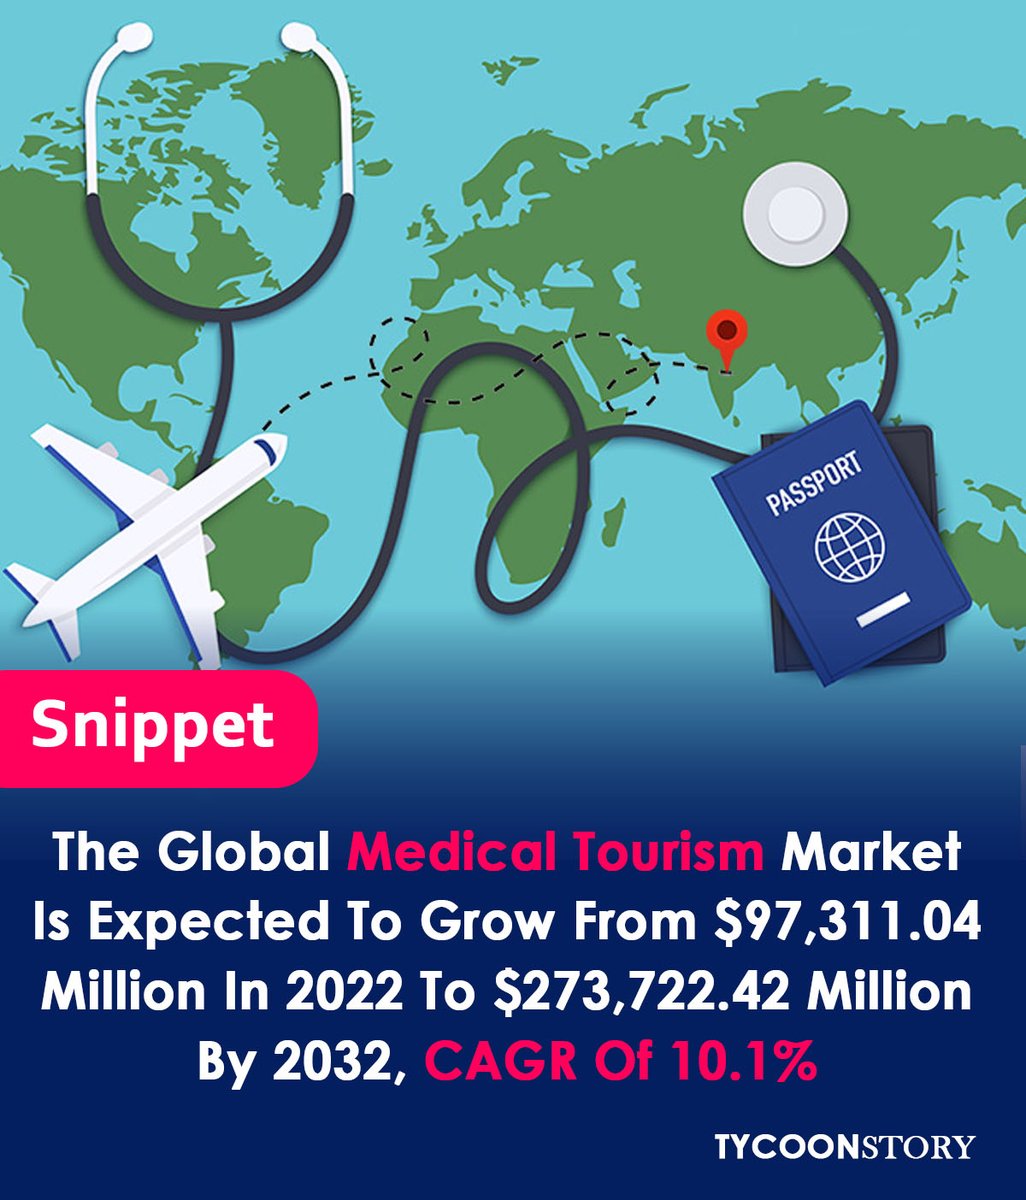 Are You Looking To Start Medical Tourism Services, Let Review The Below Market Statistics

#globalhealthcare #medicalvacation #healthexplorer #marketgrowth #medicalwellness #technology #medicalprofessional #healthcareservices #medicaltechnology #cancerradiation @barbadosivf